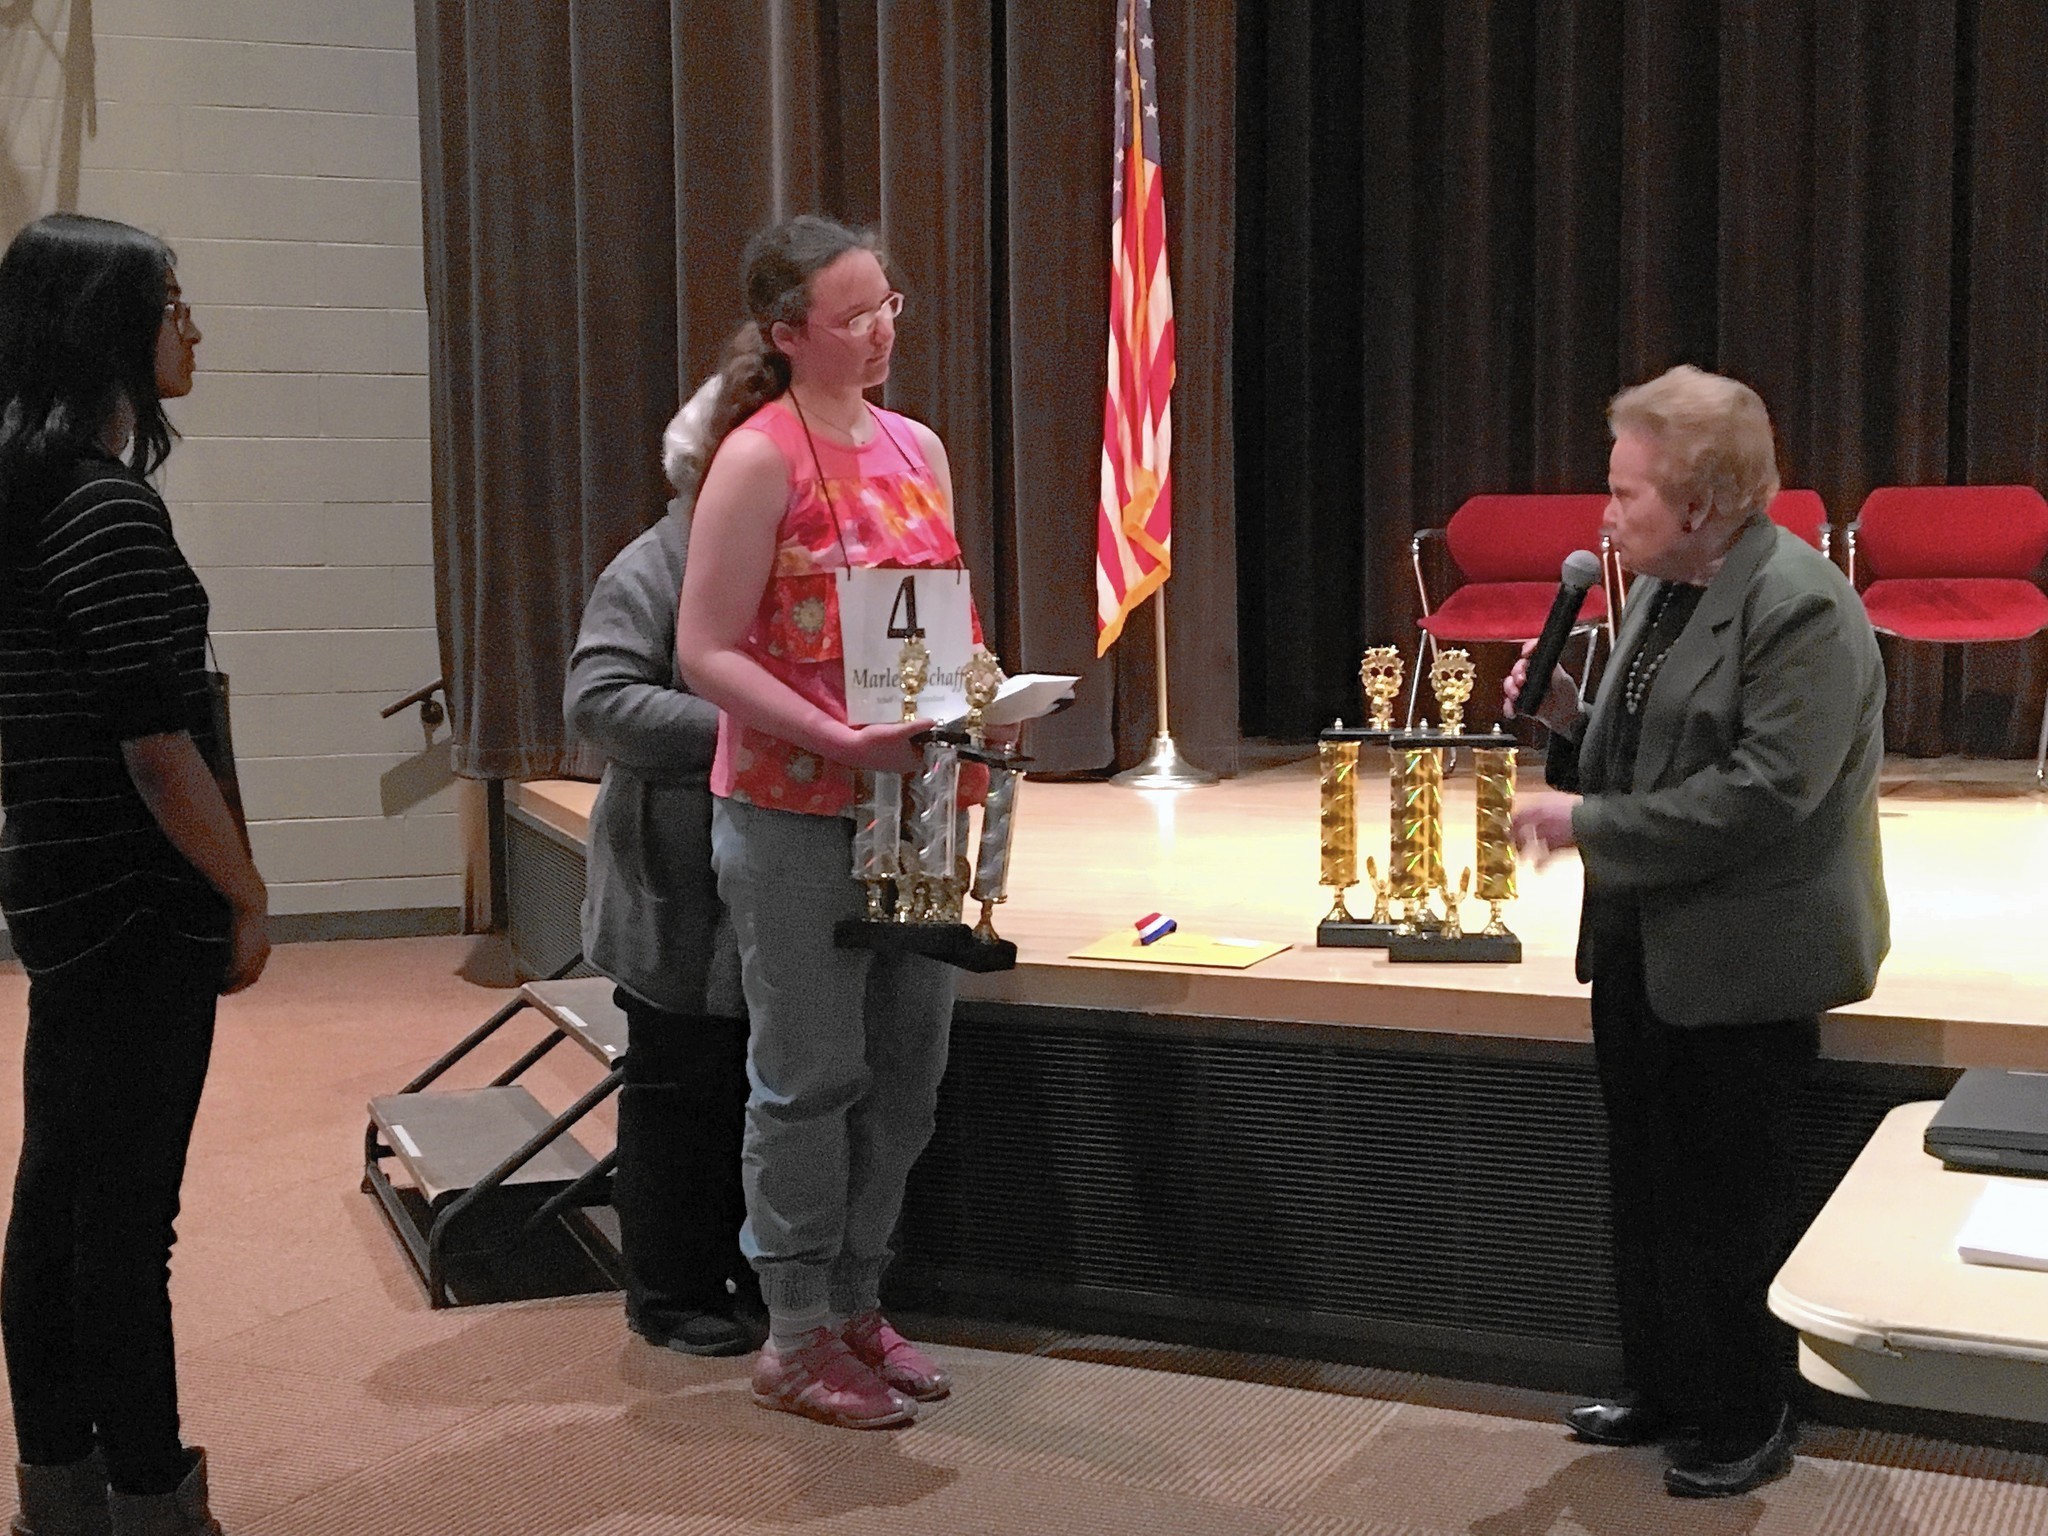 Lake Zurich girl wins spelling bee; result challenged - Lake County ... - Chicago Tribune